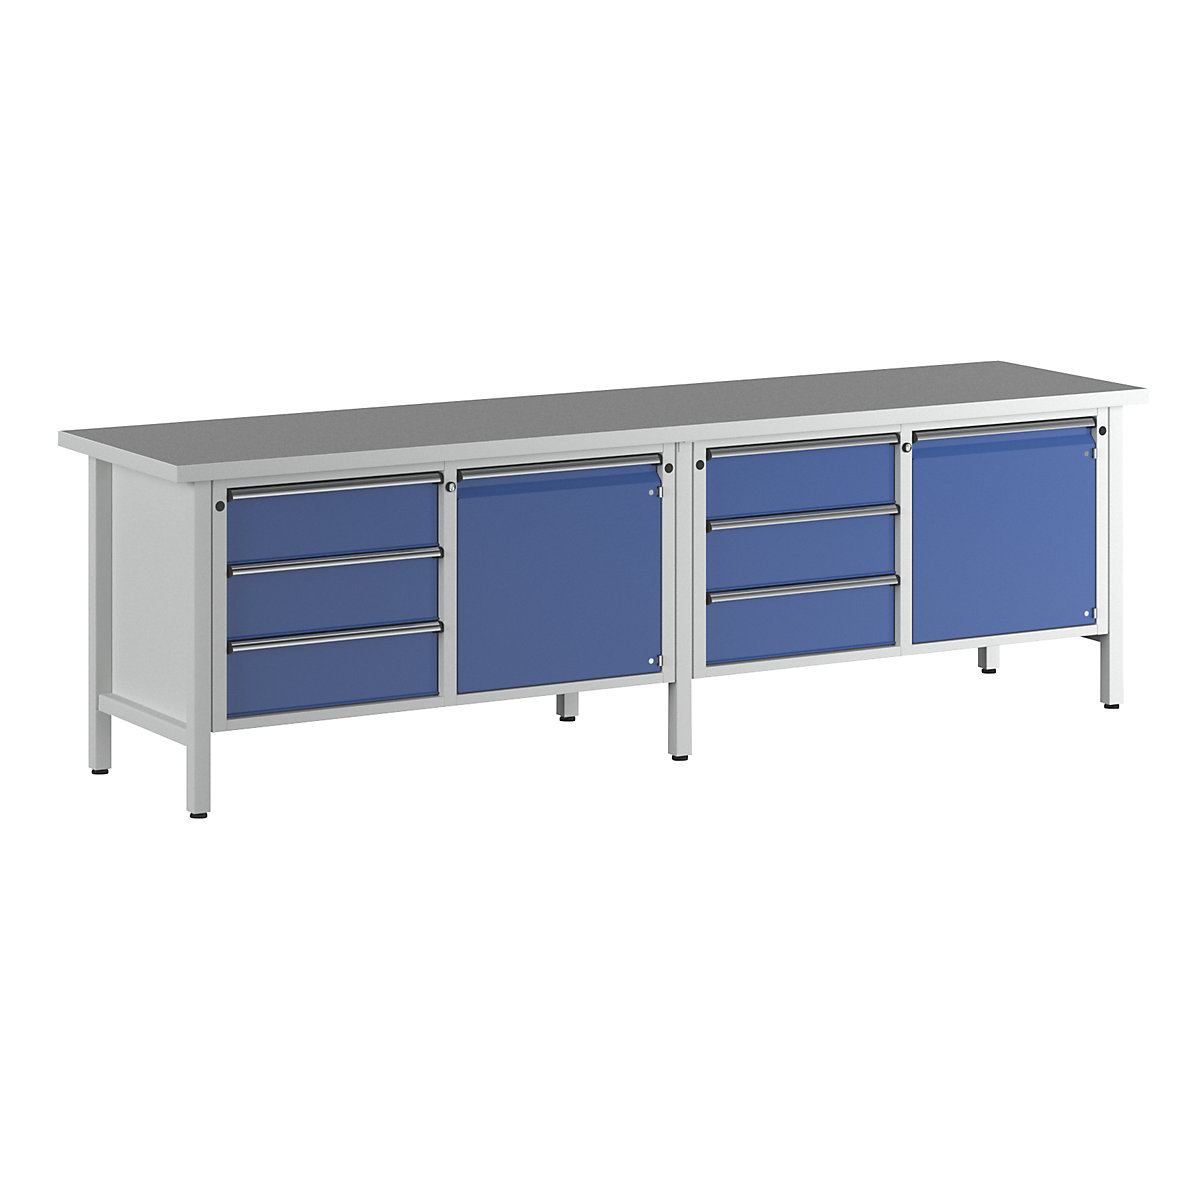 Workbench width 2800 mm, frame construction – ANKE, 2 doors, 6 drawers with full extension, universal worktop-8